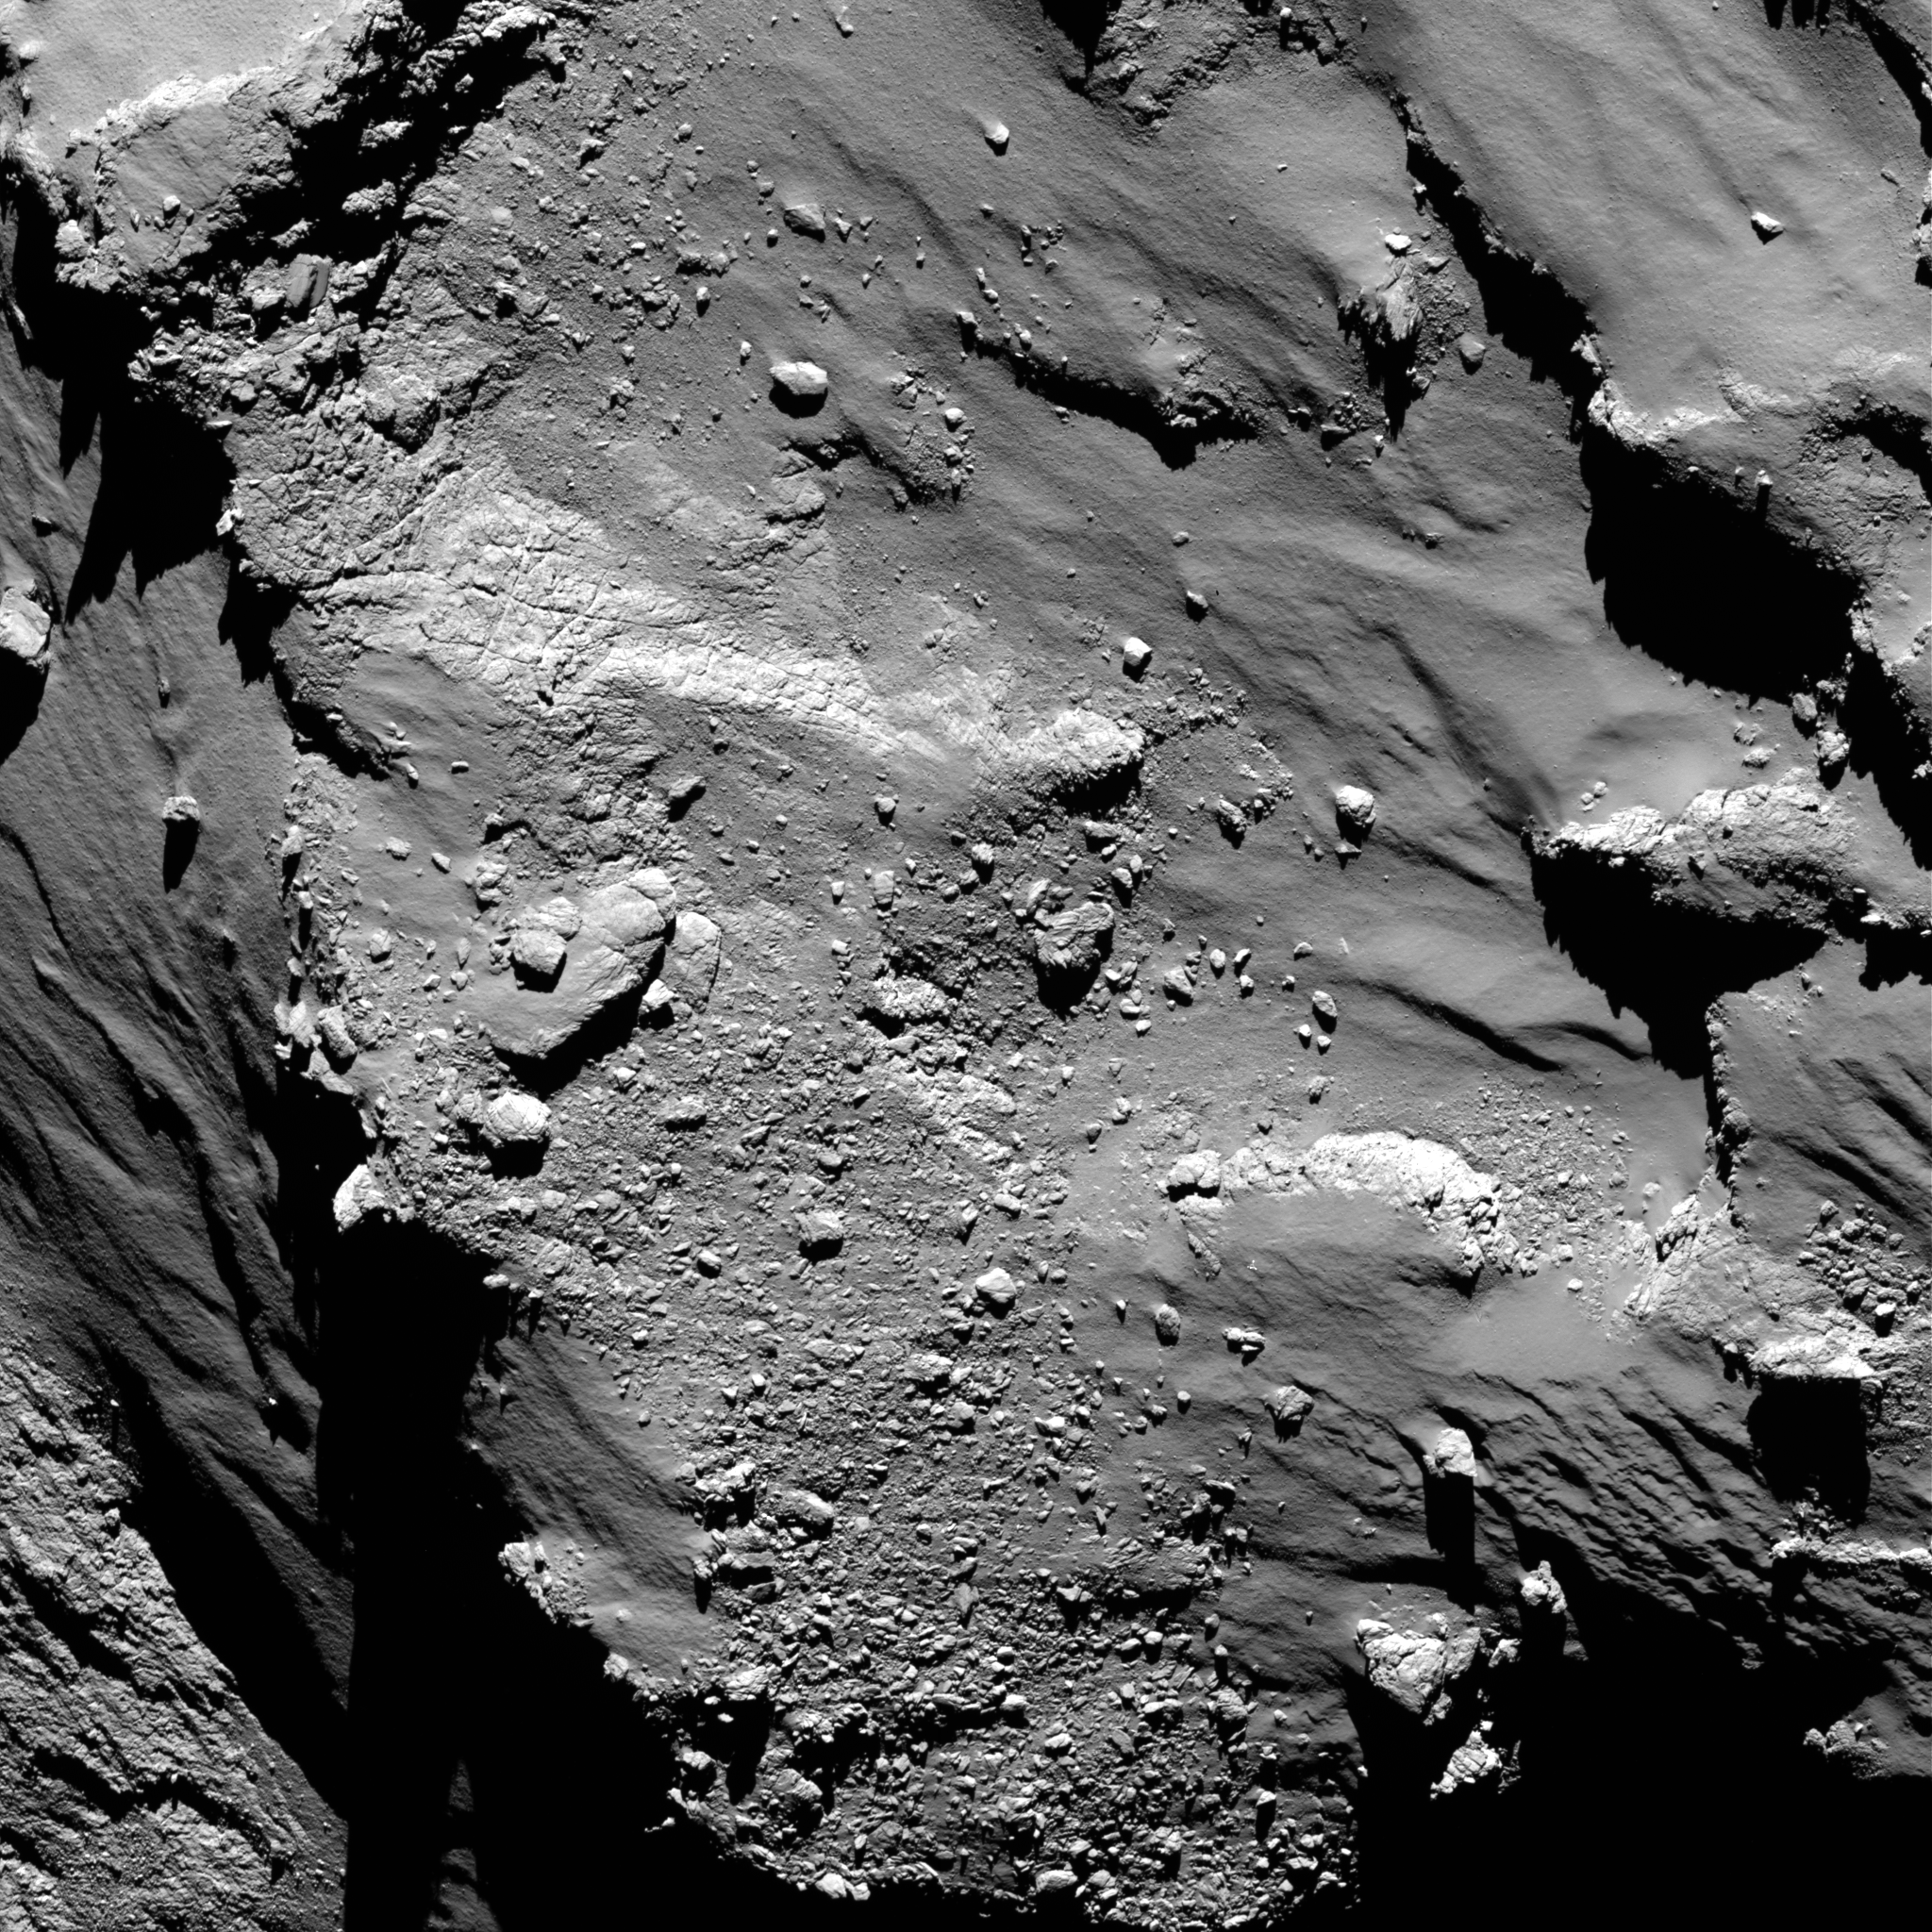 Can you spot Philae in this image taken during the landing on 12 November 2014? Credits: ESA/Rosetta/MPS for OSIRIS Team MPS/UPD/LAM/IAA/SSO/INTA/UPM/DASP/IDA